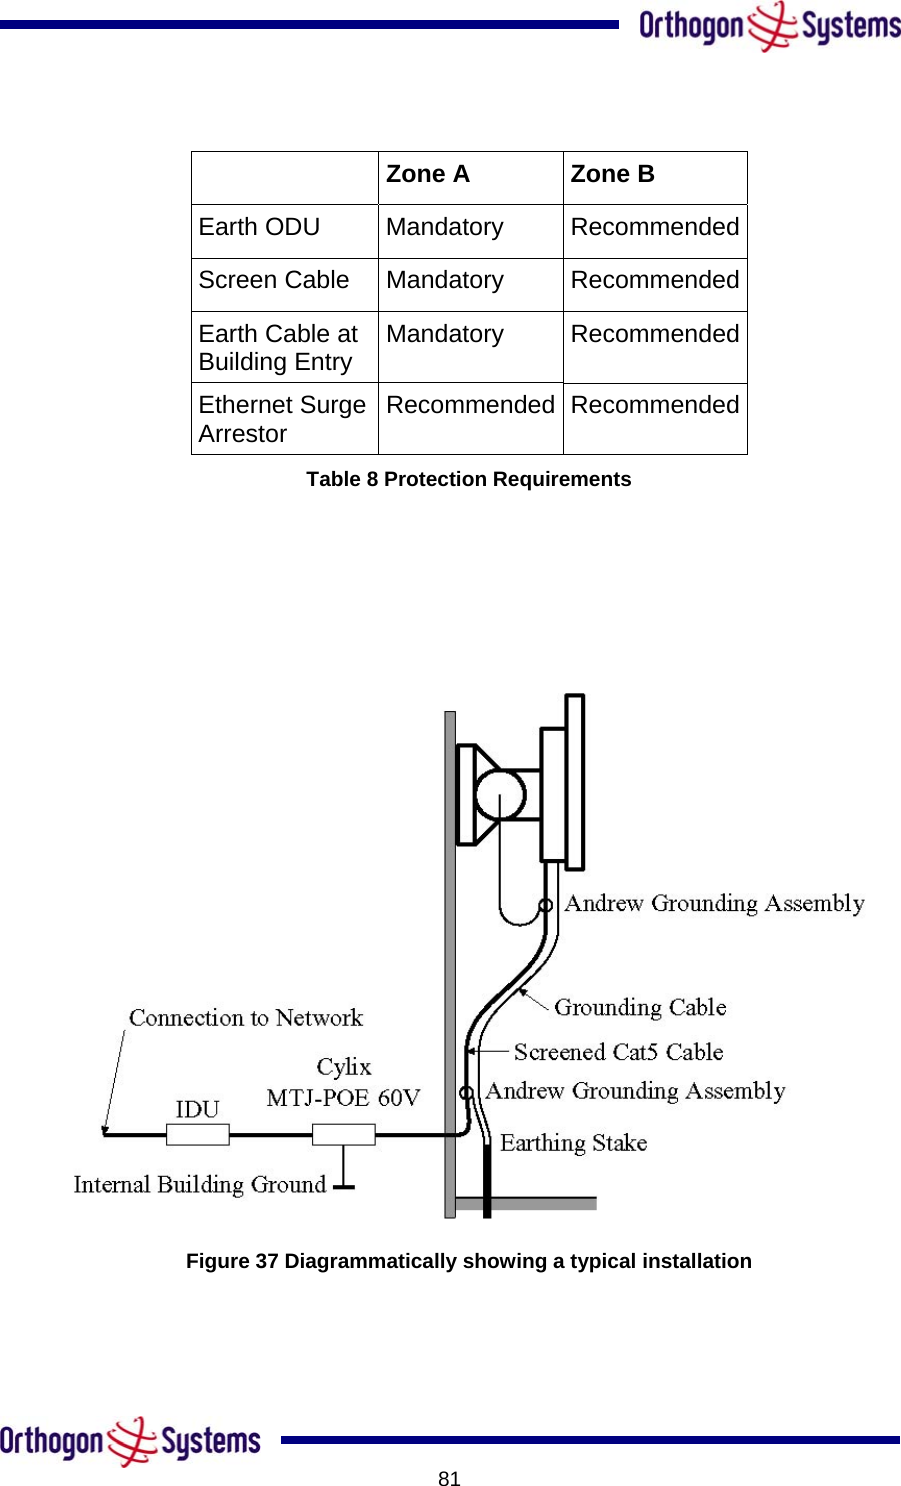           81  Zone A  Zone B  Earth ODU   Mandatory   Recommended Screen Cable   Mandatory  Recommended Earth Cable at Building Entry   Mandatory Recommended Ethernet Surge Arrestor   Recommended Recommended Table 8 Protection Requirements      Figure 37 Diagrammatically showing a typical installation 